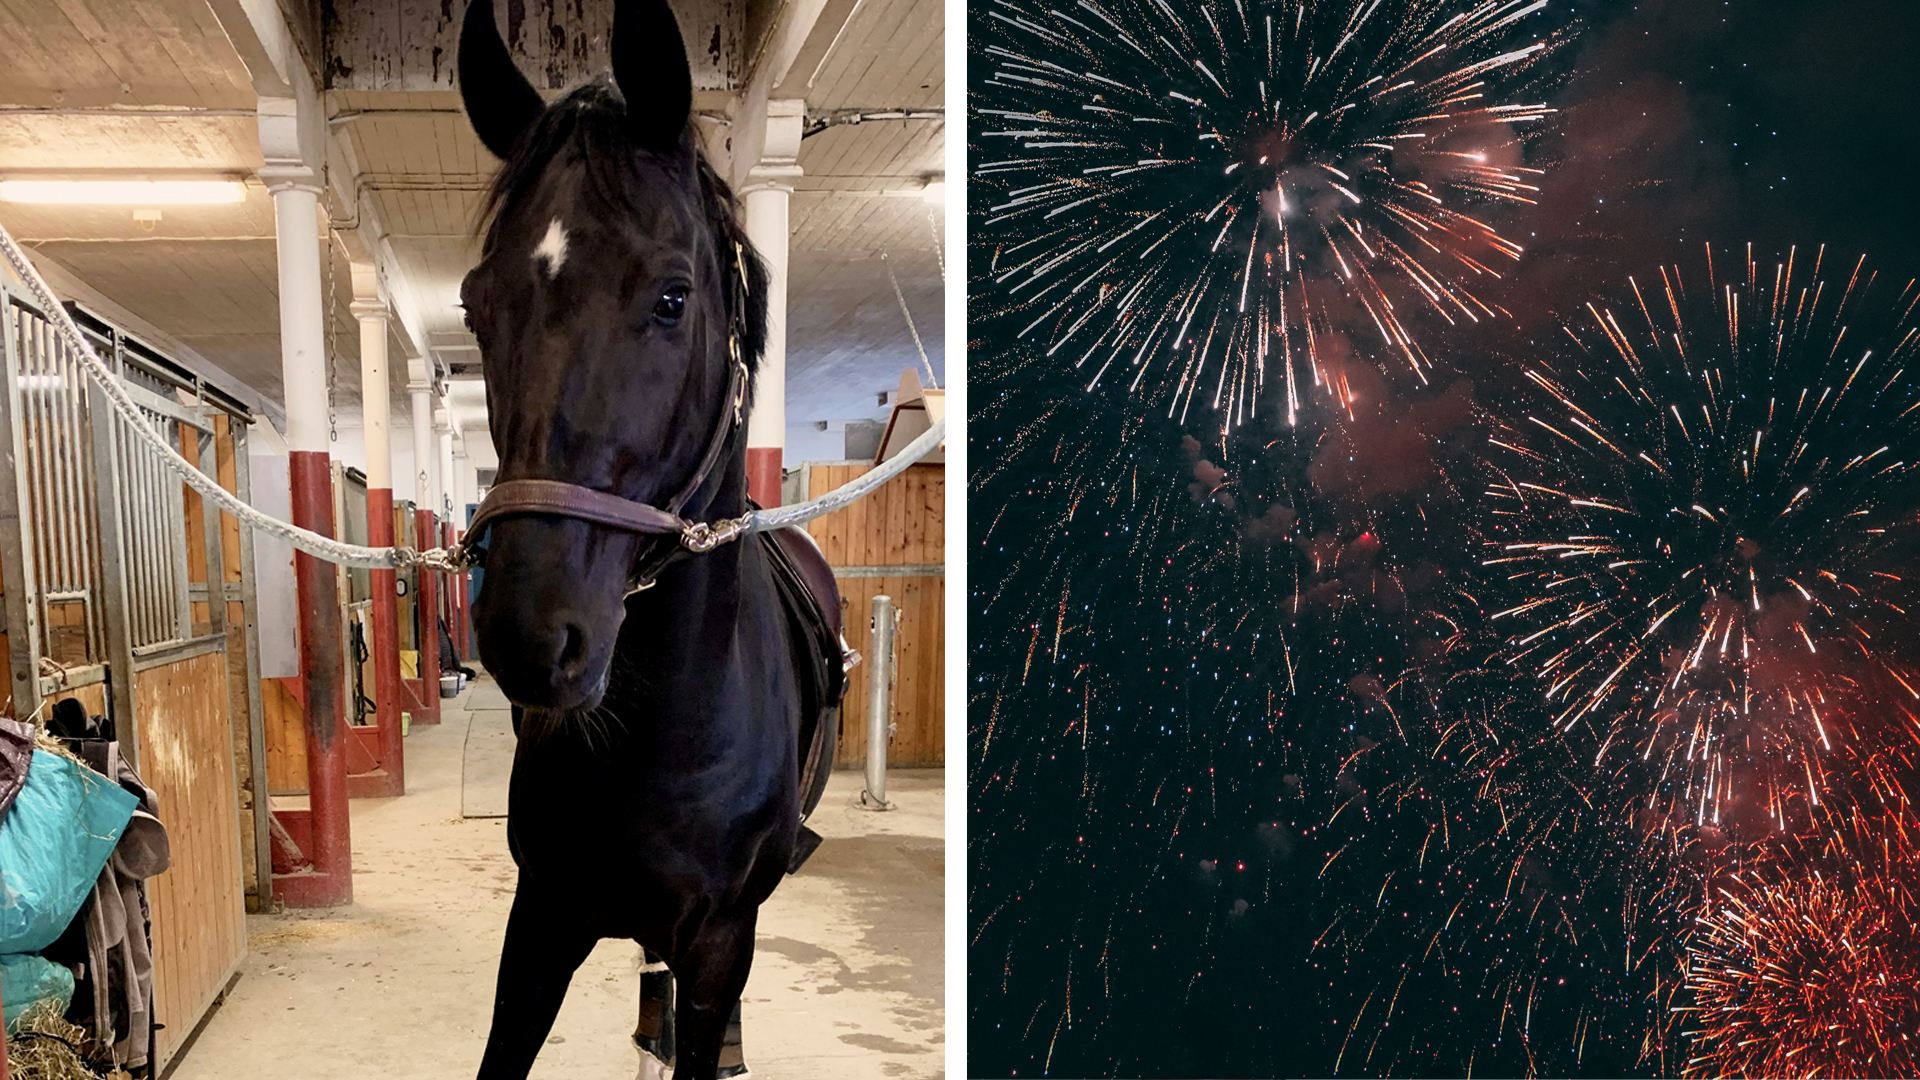 Black horse in stable and fireworks